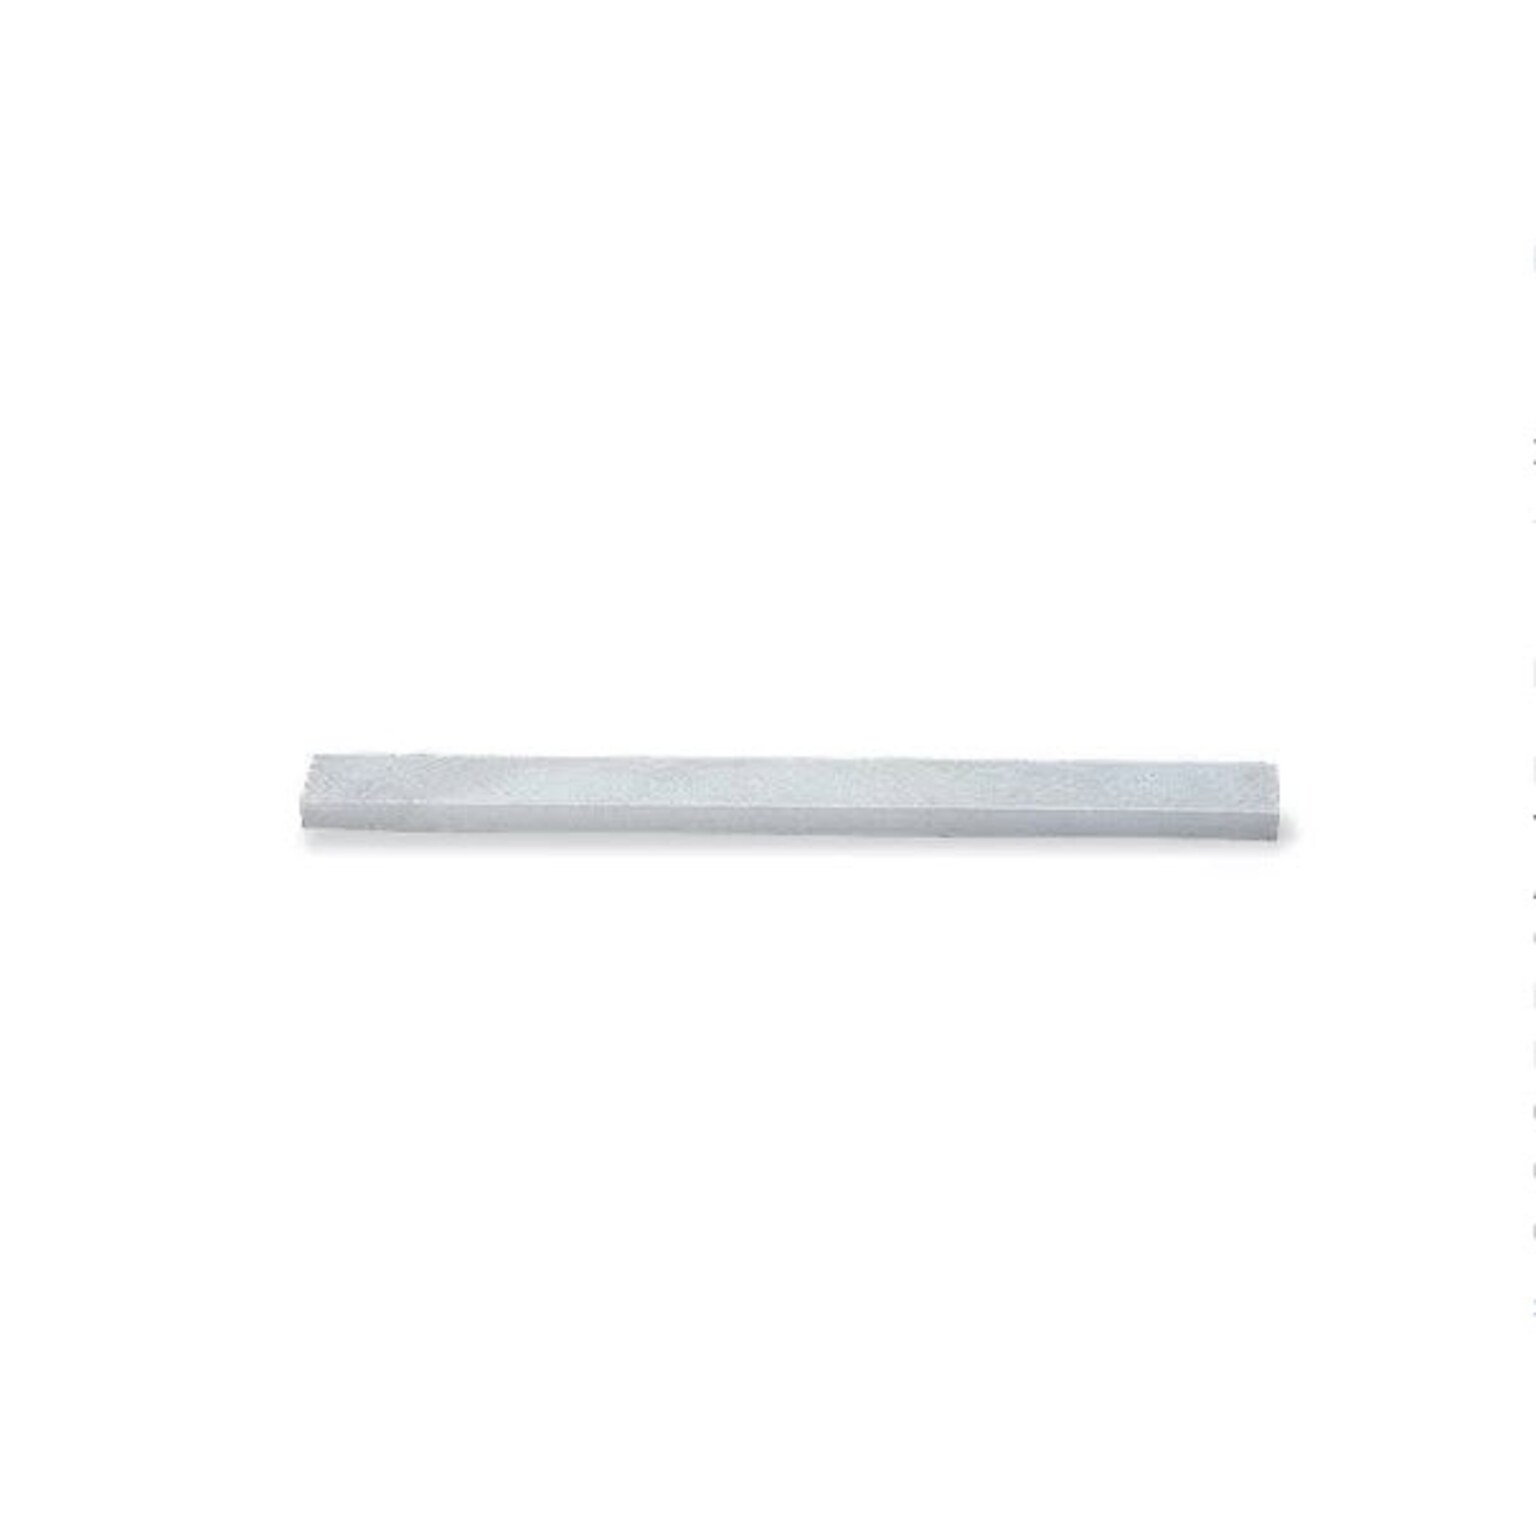 Markal® Soapstone Markers, White, Flat, 5 X 1/2 in, 144/Box (434-80129)